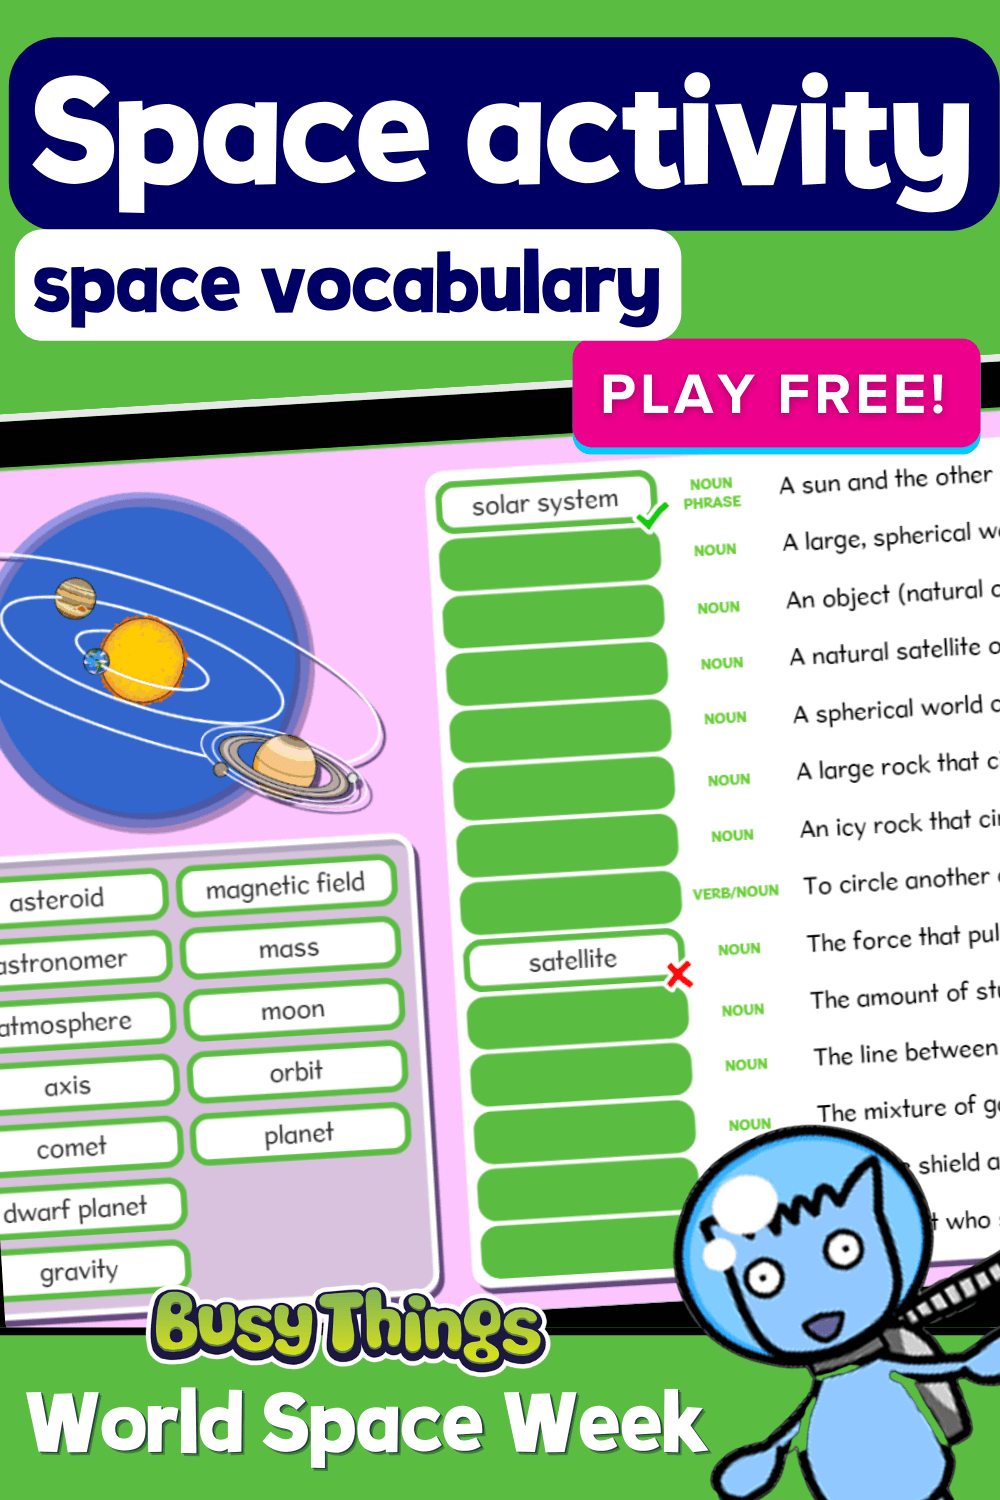 Space activity for kids: space vocabularly